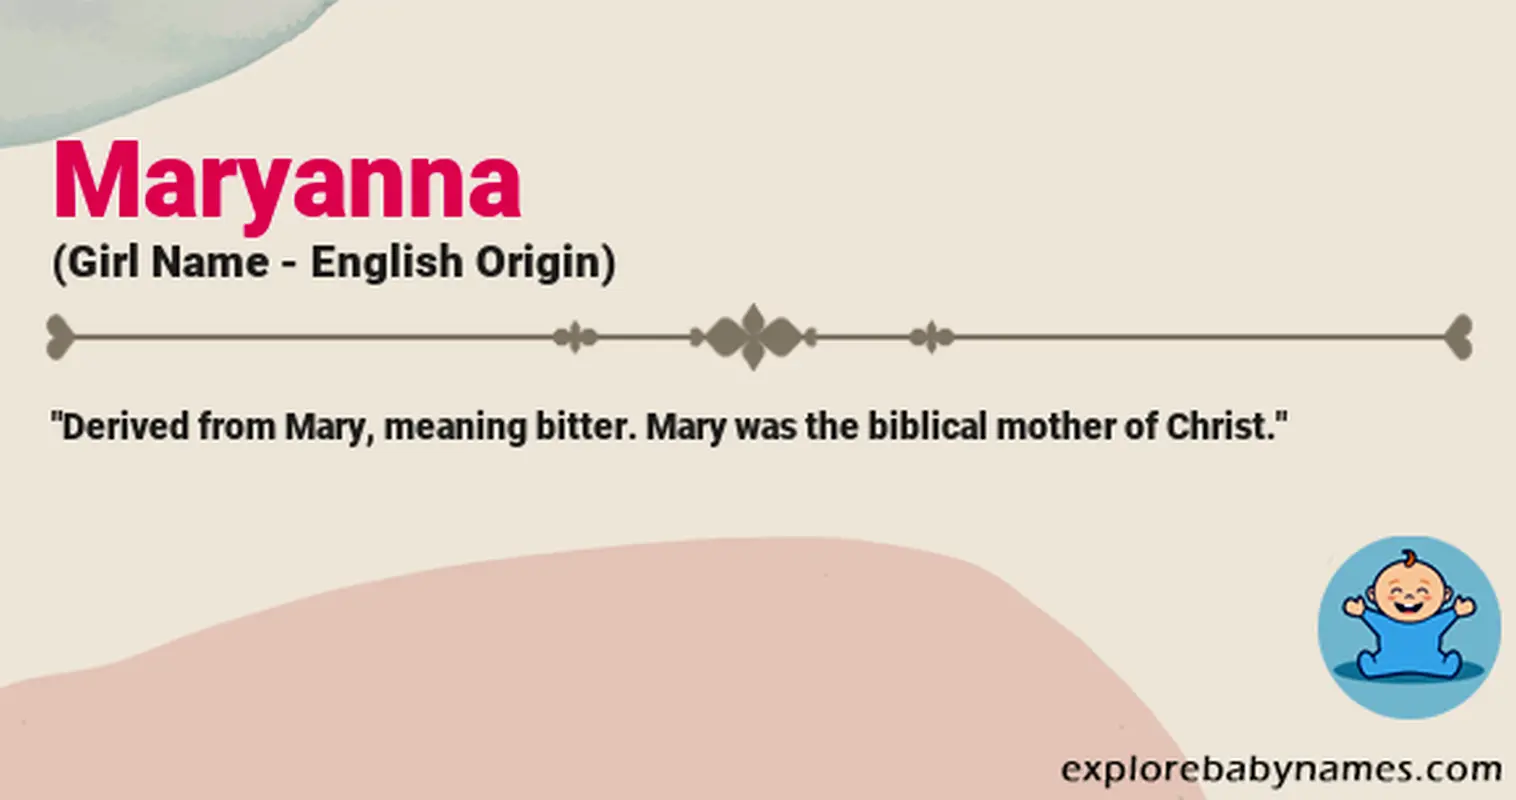 Meaning of Maryanna